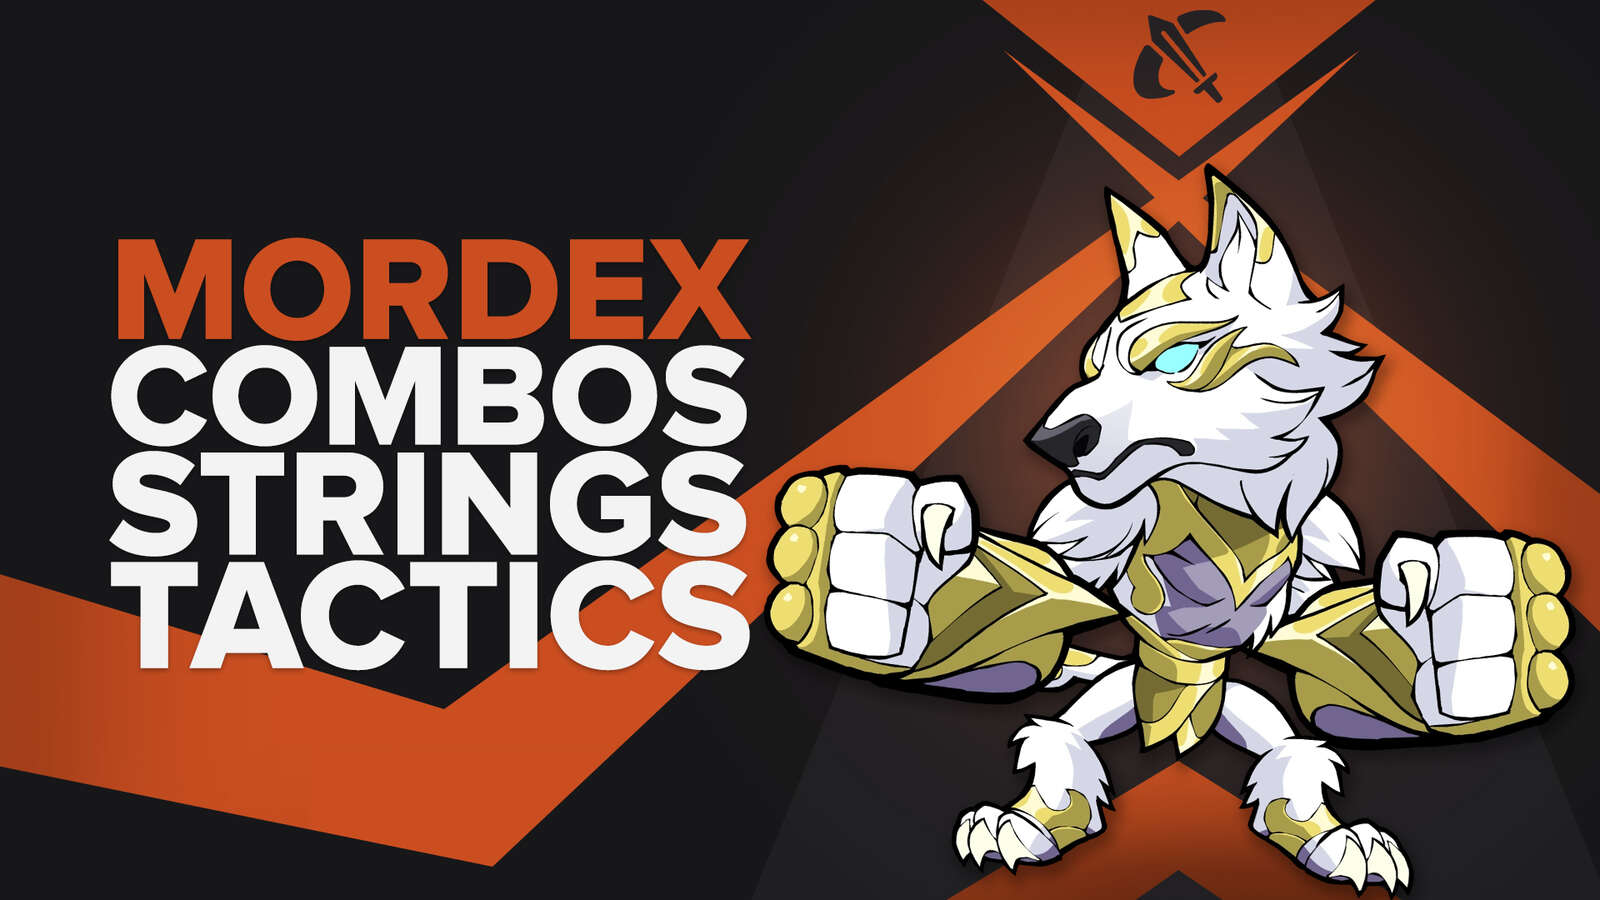 Best Mordex combos, strings and tips in Brawlhalla